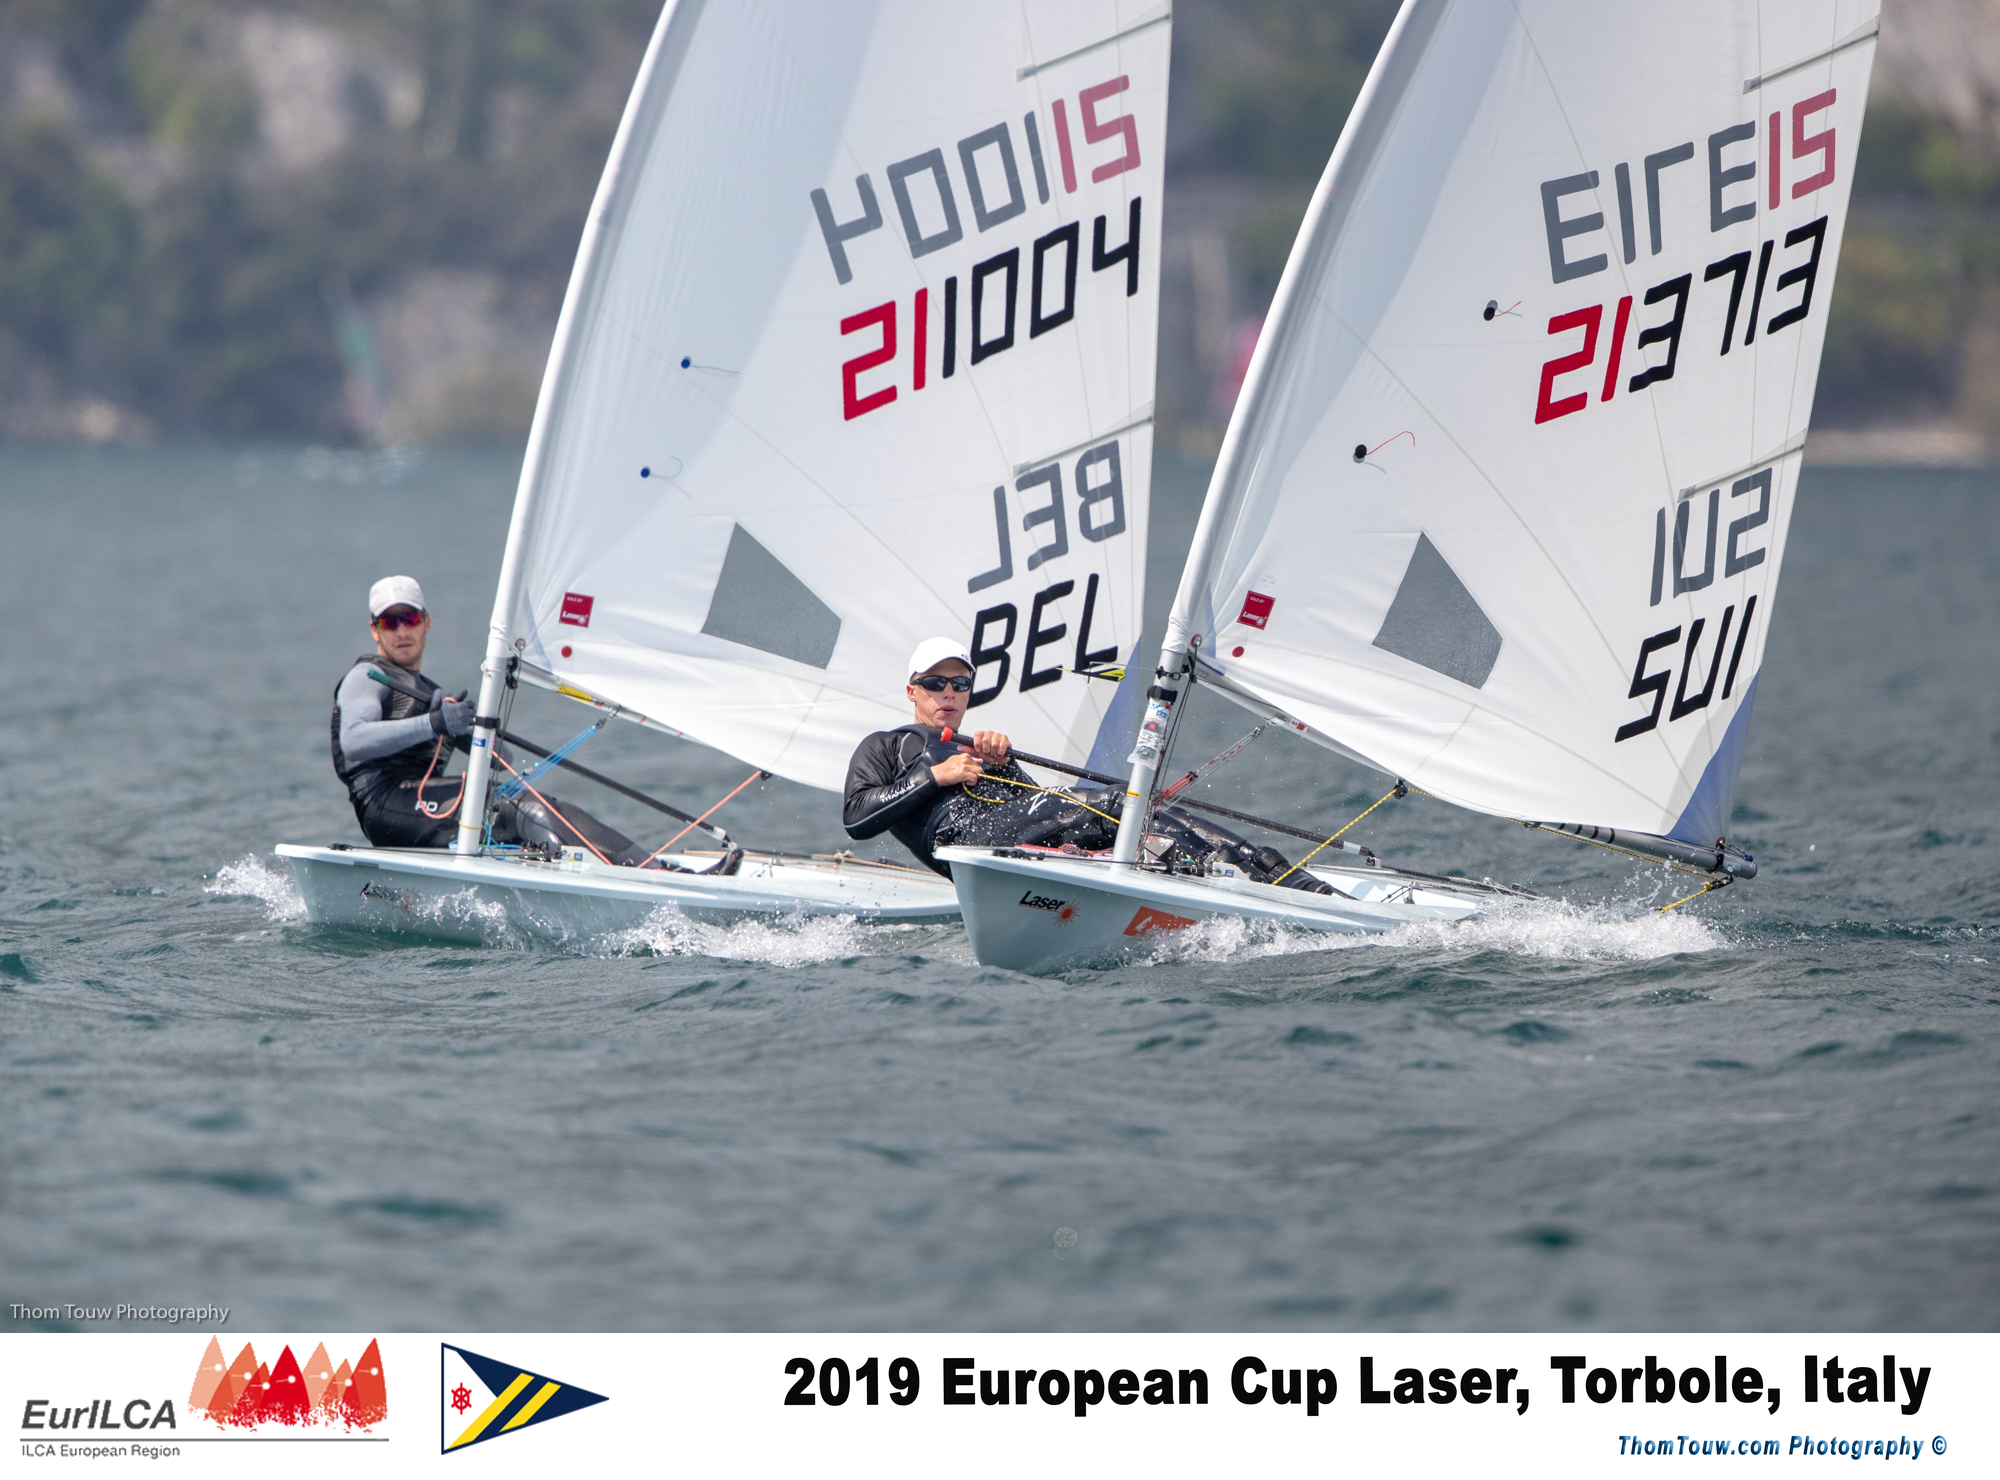  Laser  Europacup 2019  Act 4  Torbole ITA  Day 2  RUS, SUI and ITA leaders after four good races